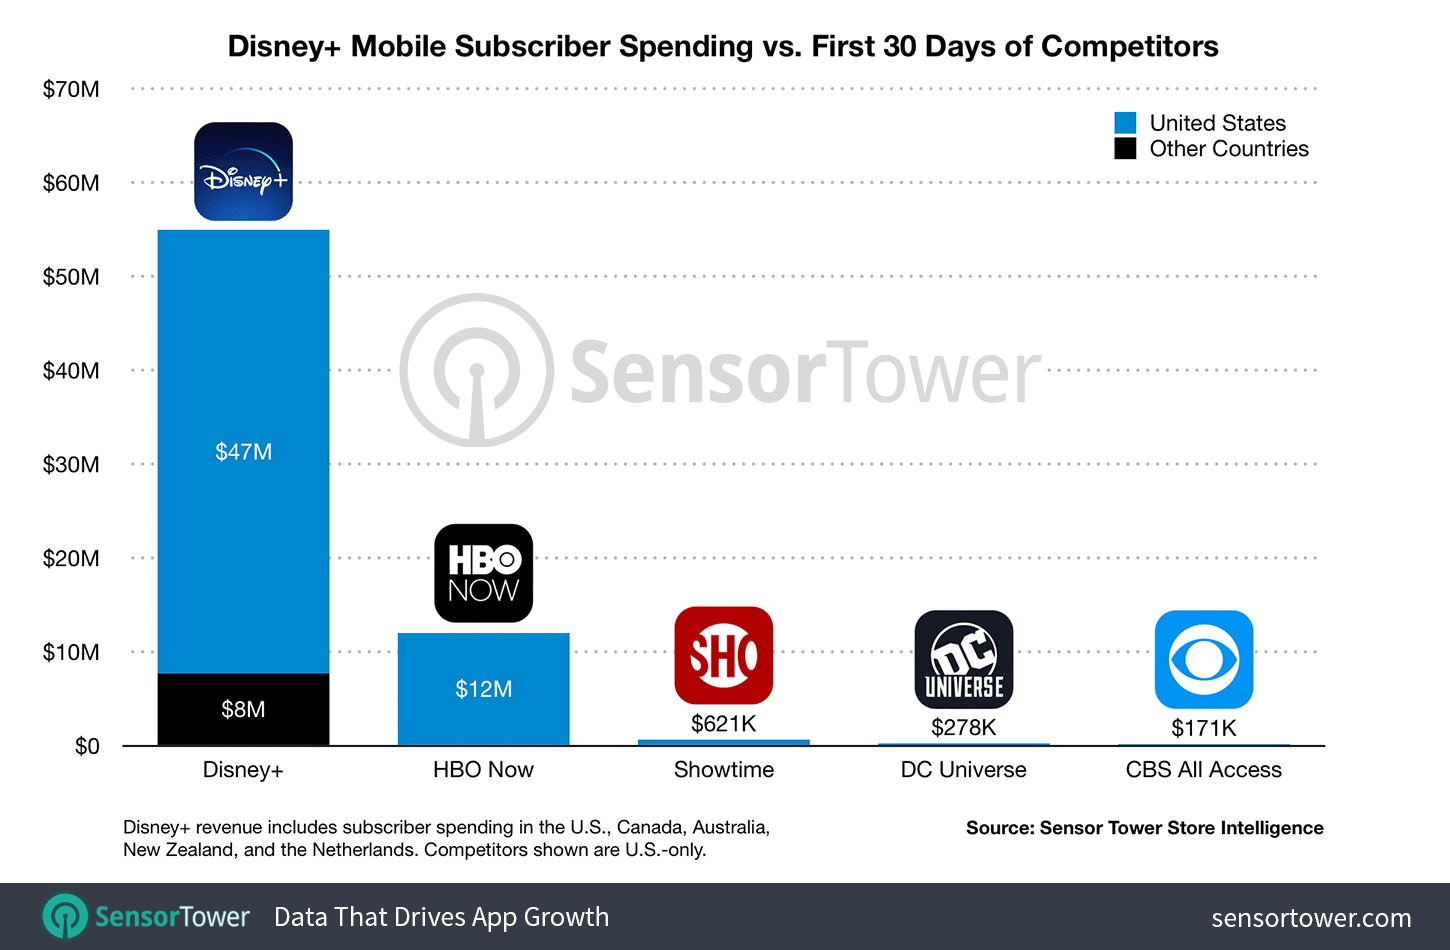 Comparison of Disney+ first month mobile revenue to competing apps